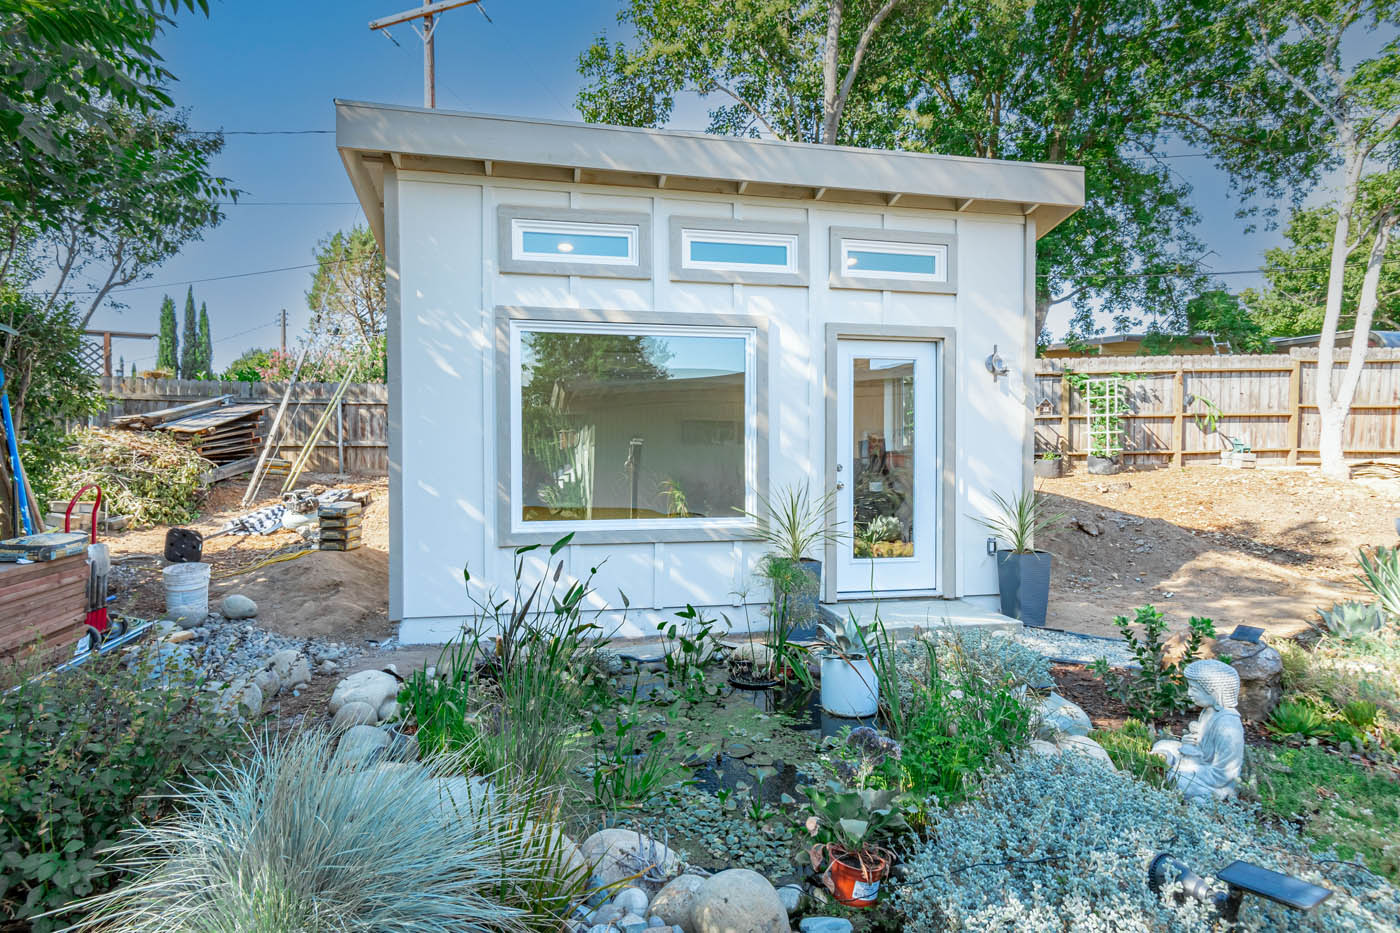 A Denver detached ADU in a California backyard by a pool, learn more about our best tiny home builder in Denver.